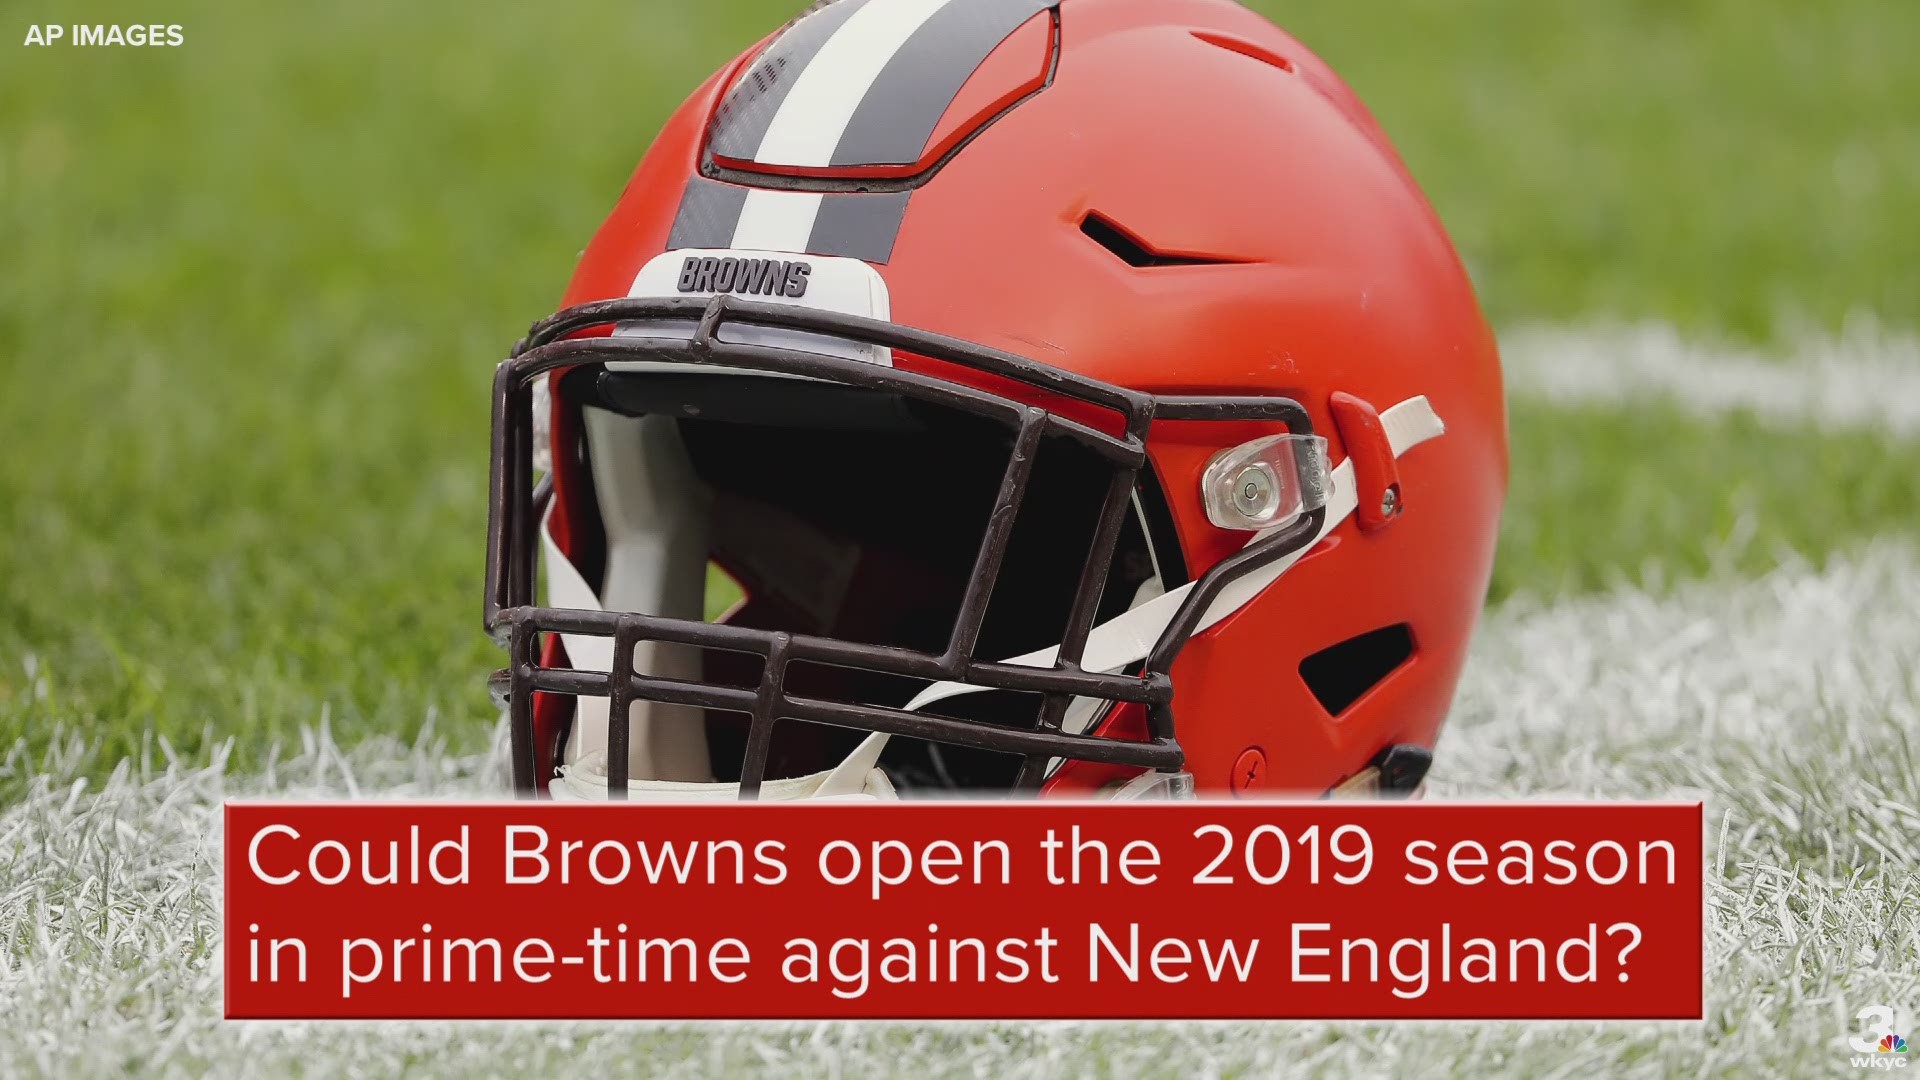 Could the Cleveland Browns open the 2019 season in prime-time action at the New England Patriots?